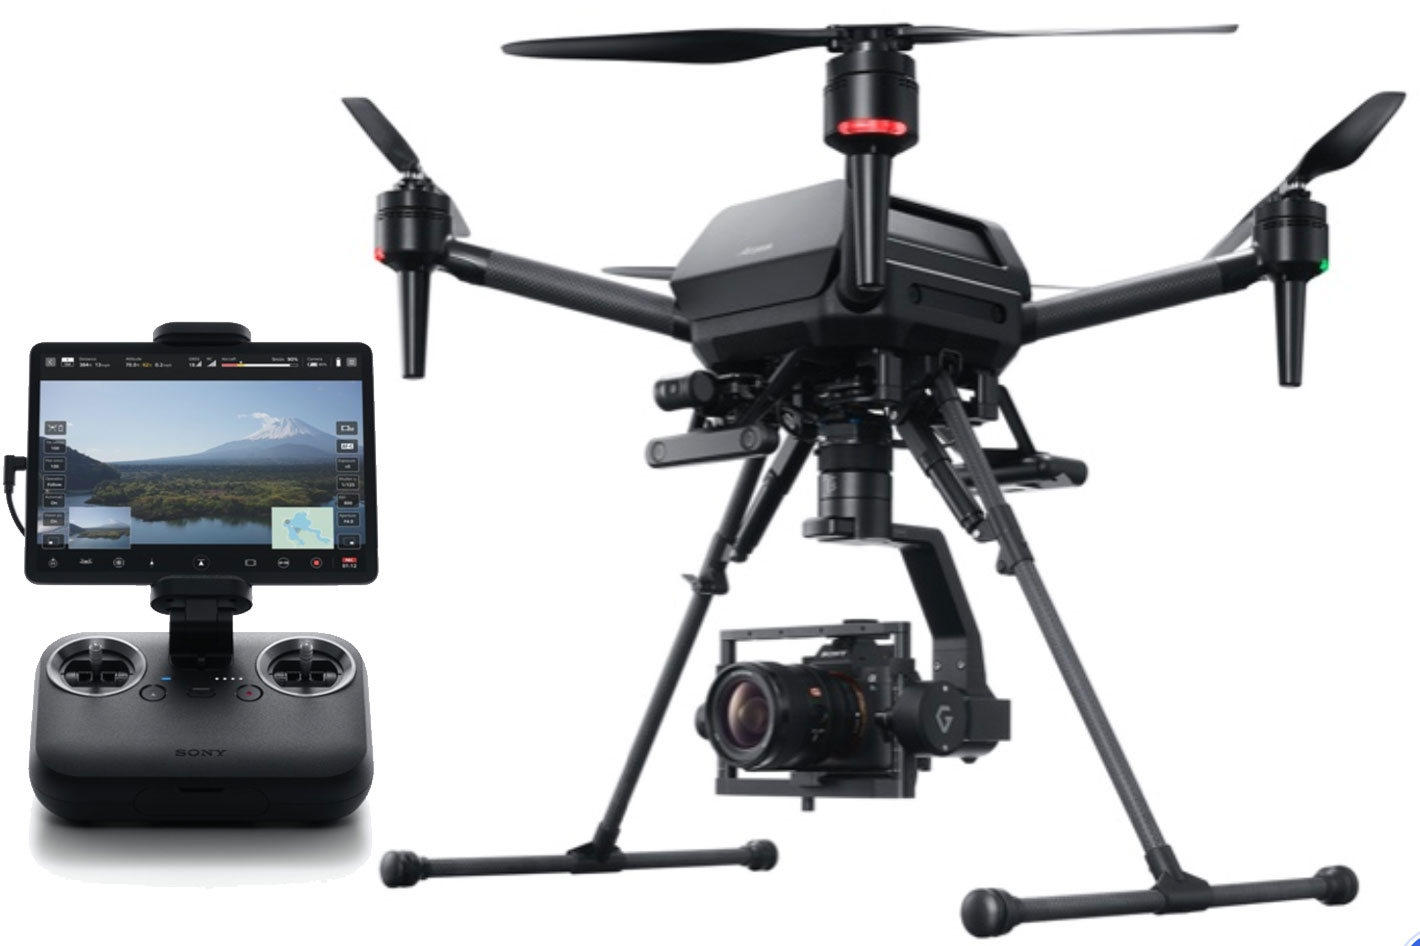 Sony Airpeak S1: a drone to support the creativity of video creators